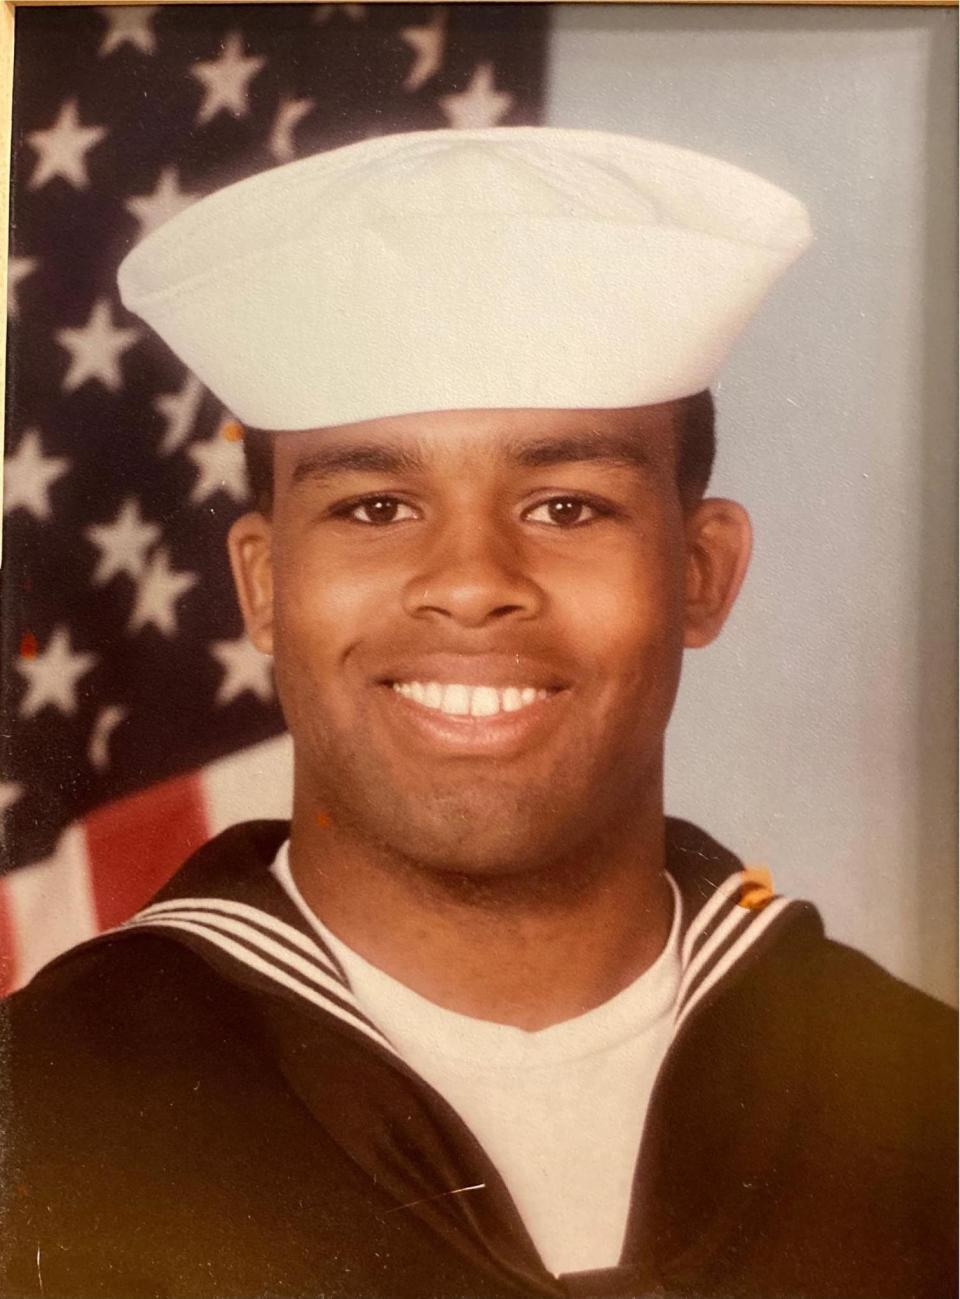 Michael McDaniel served in the U.S. Navy. He struggled with a drug addiction but was starting to pull his life together, his sister Jada McDaniel said.